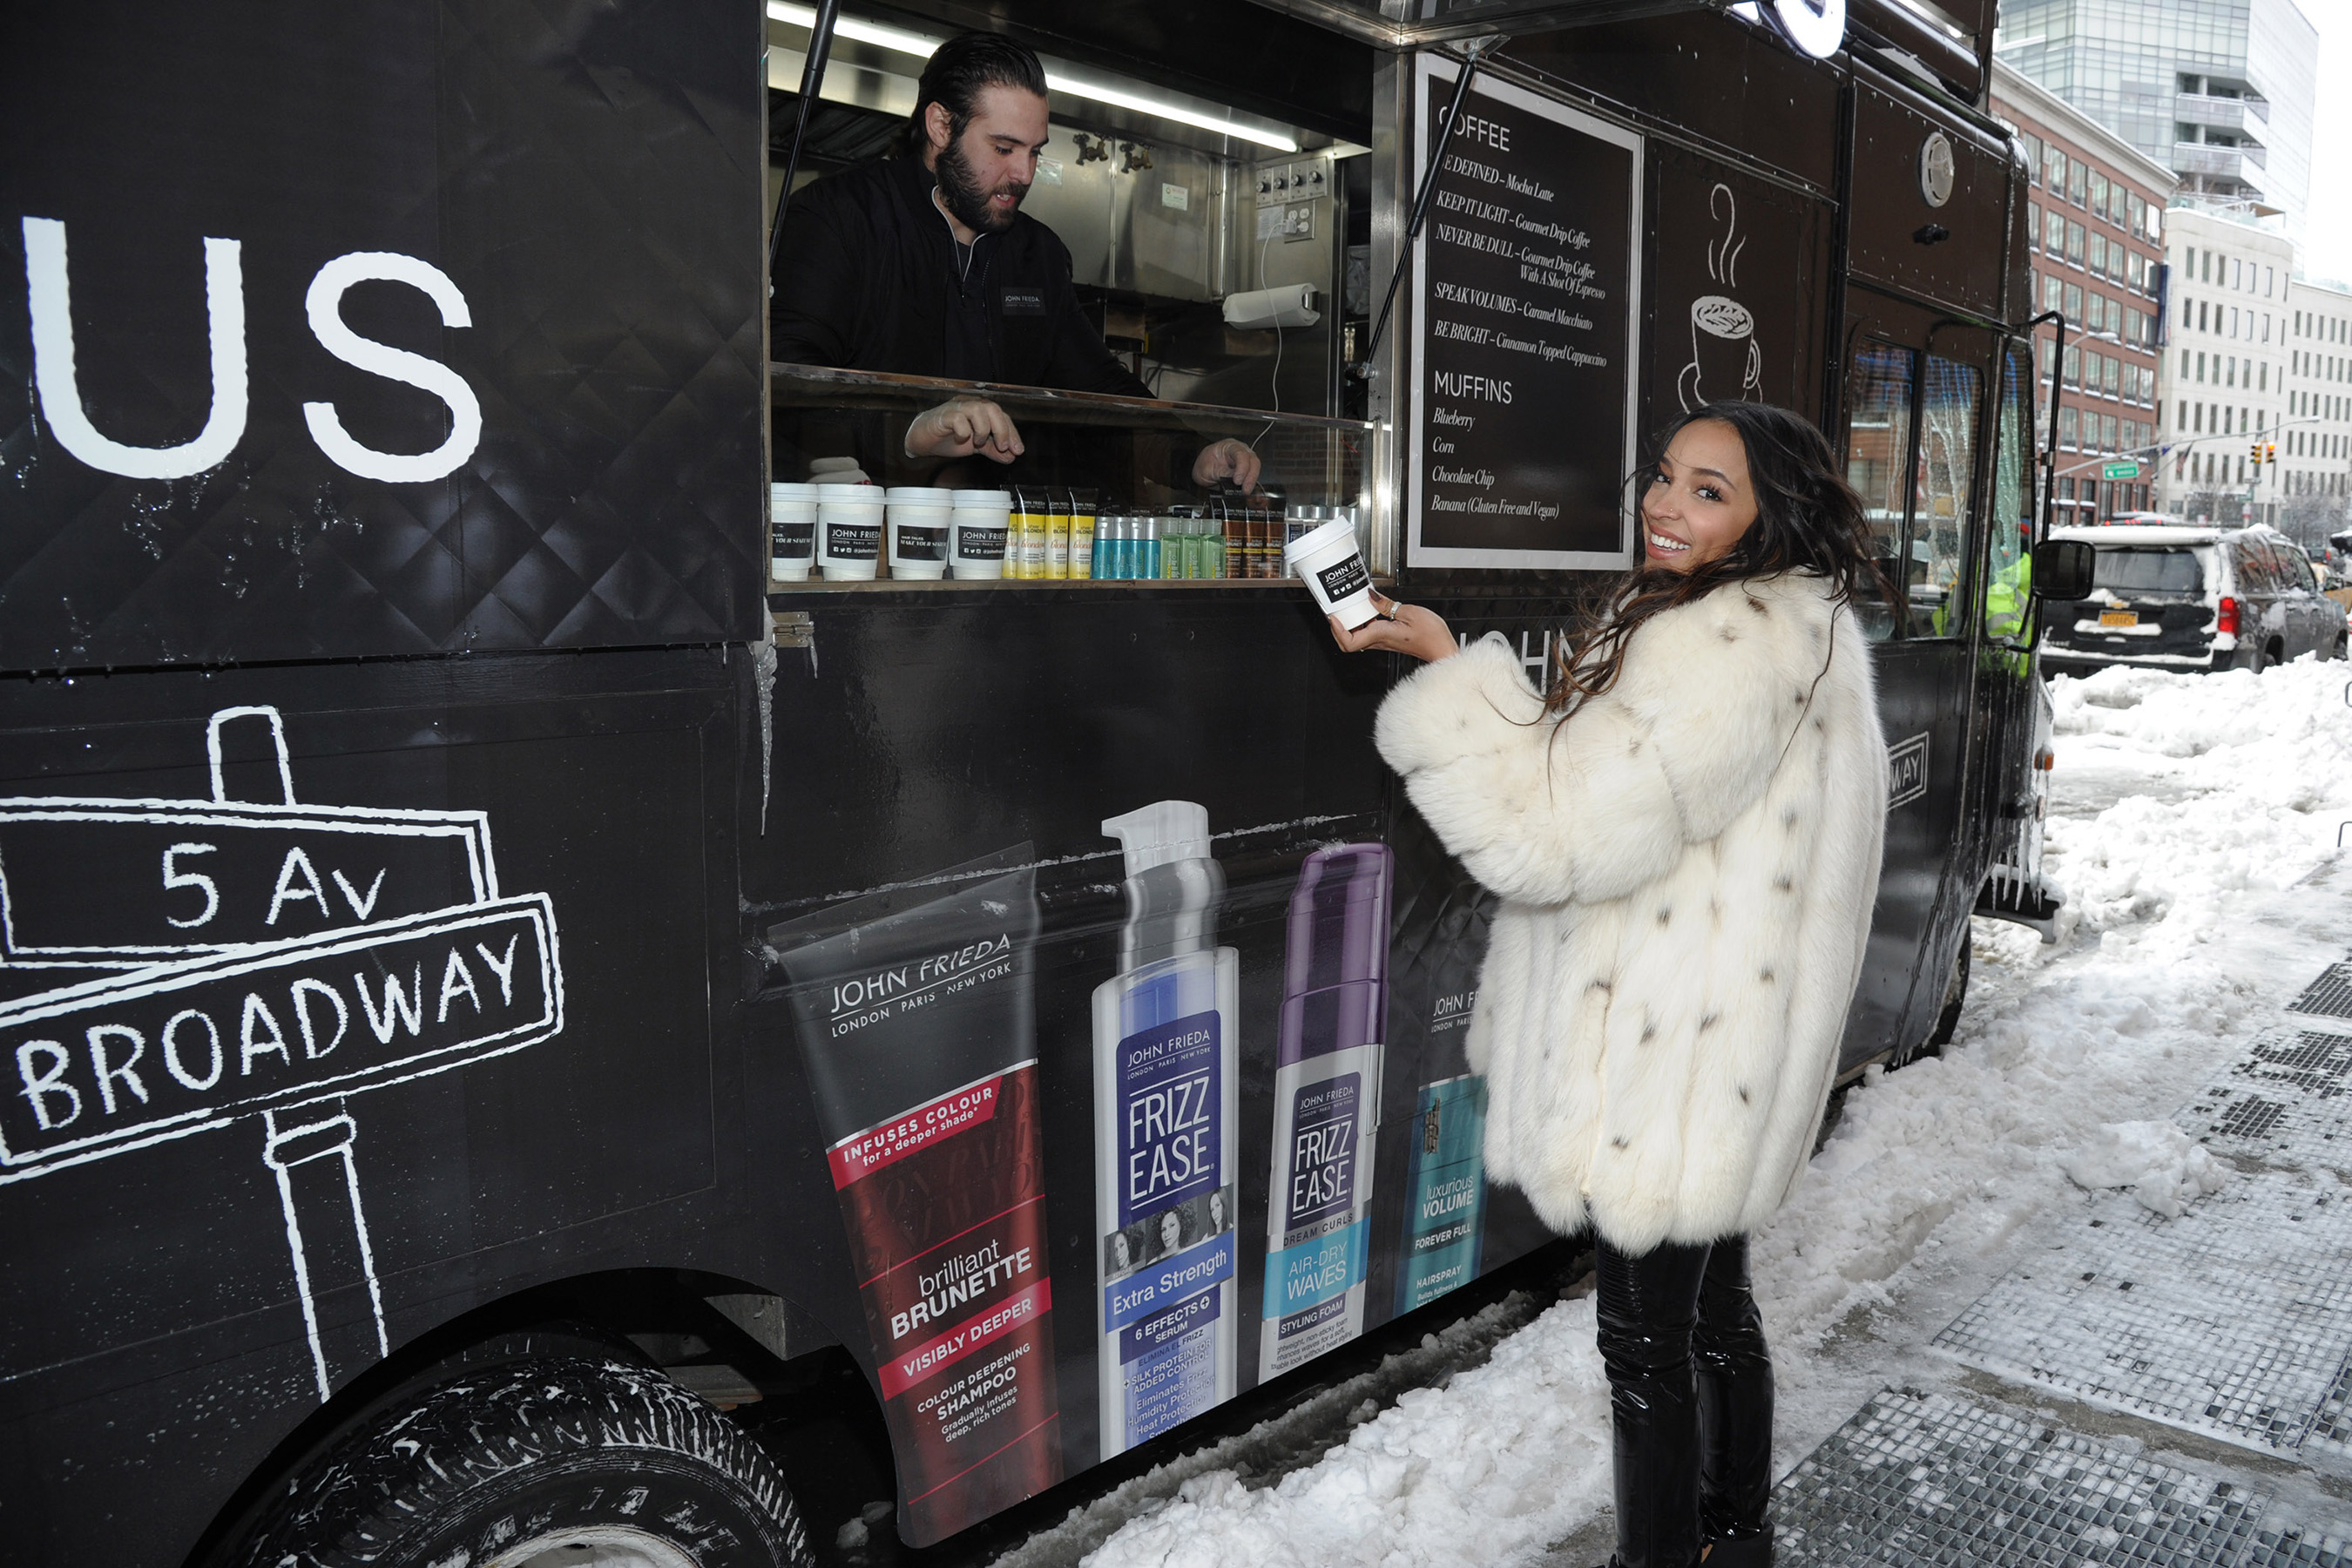 Tinashe samples coffee at the John Frieda® Hair Care coffee truck in NYC